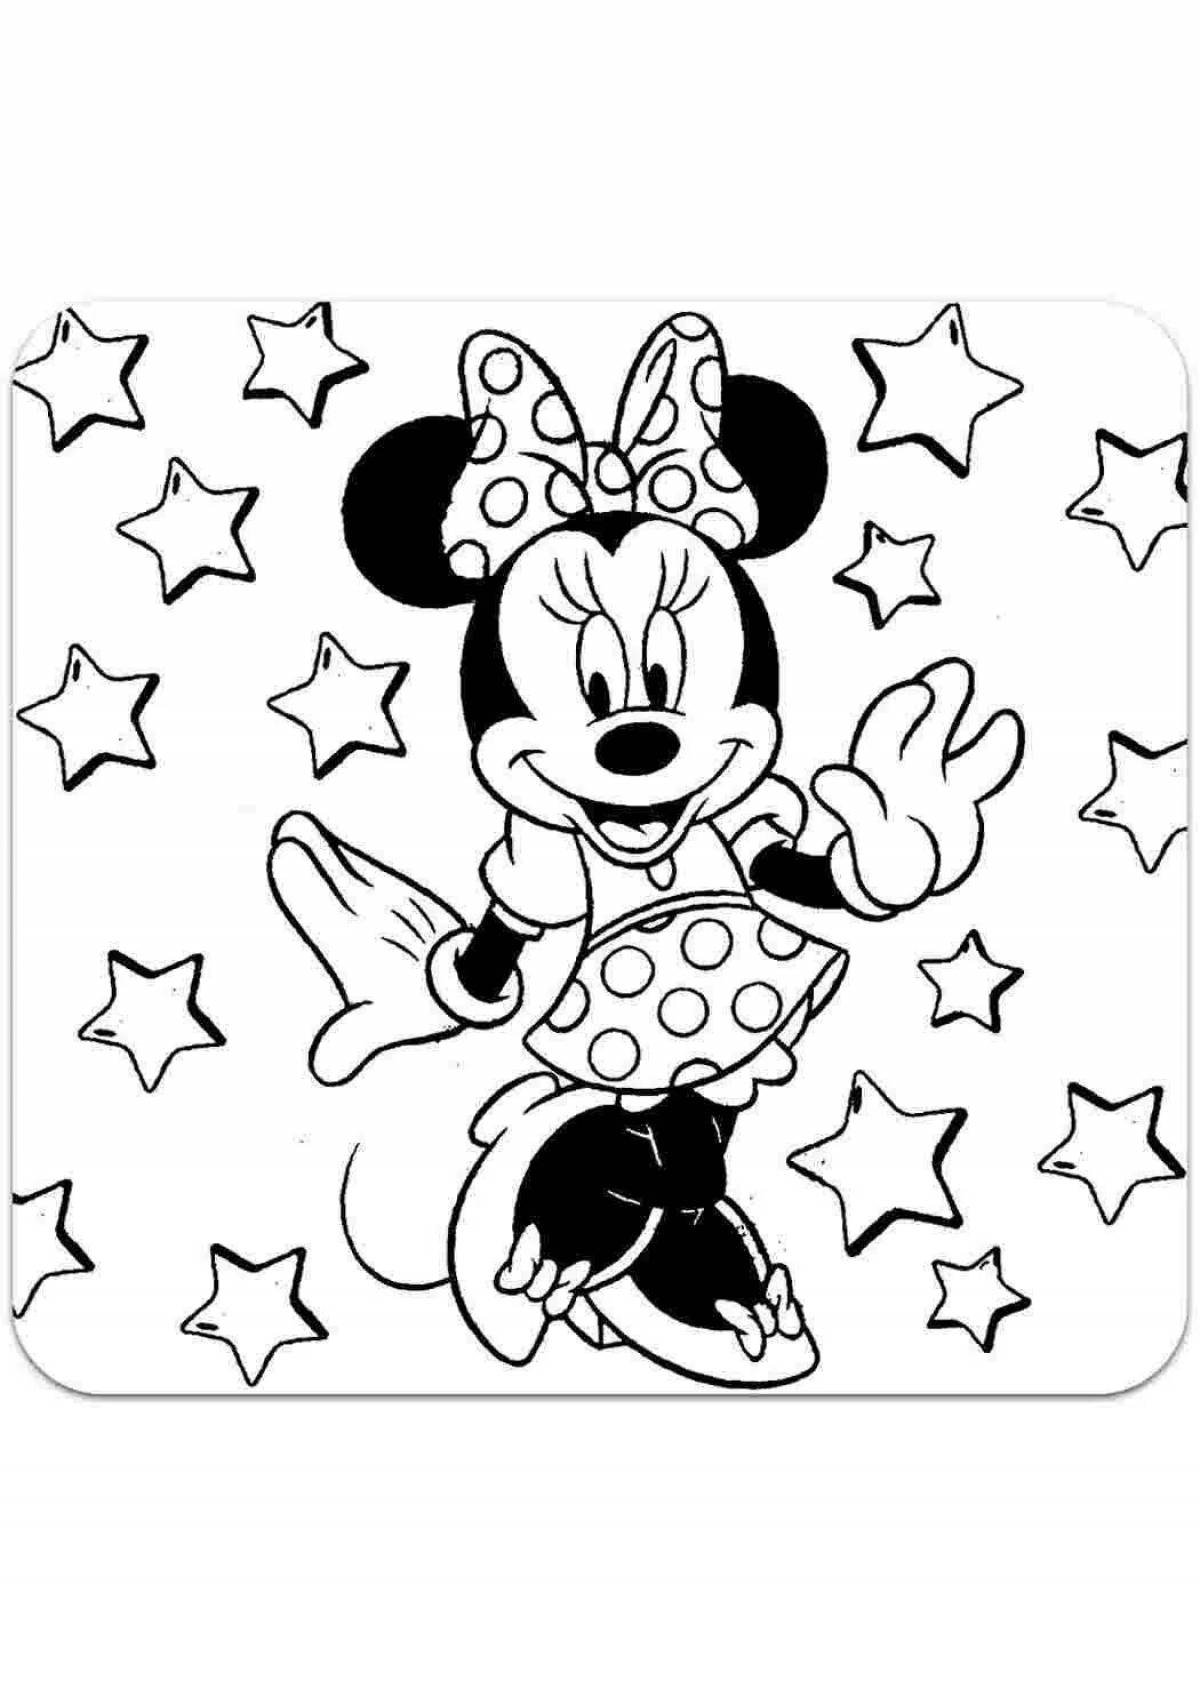 Fascinating Mickey Mouse coloring book